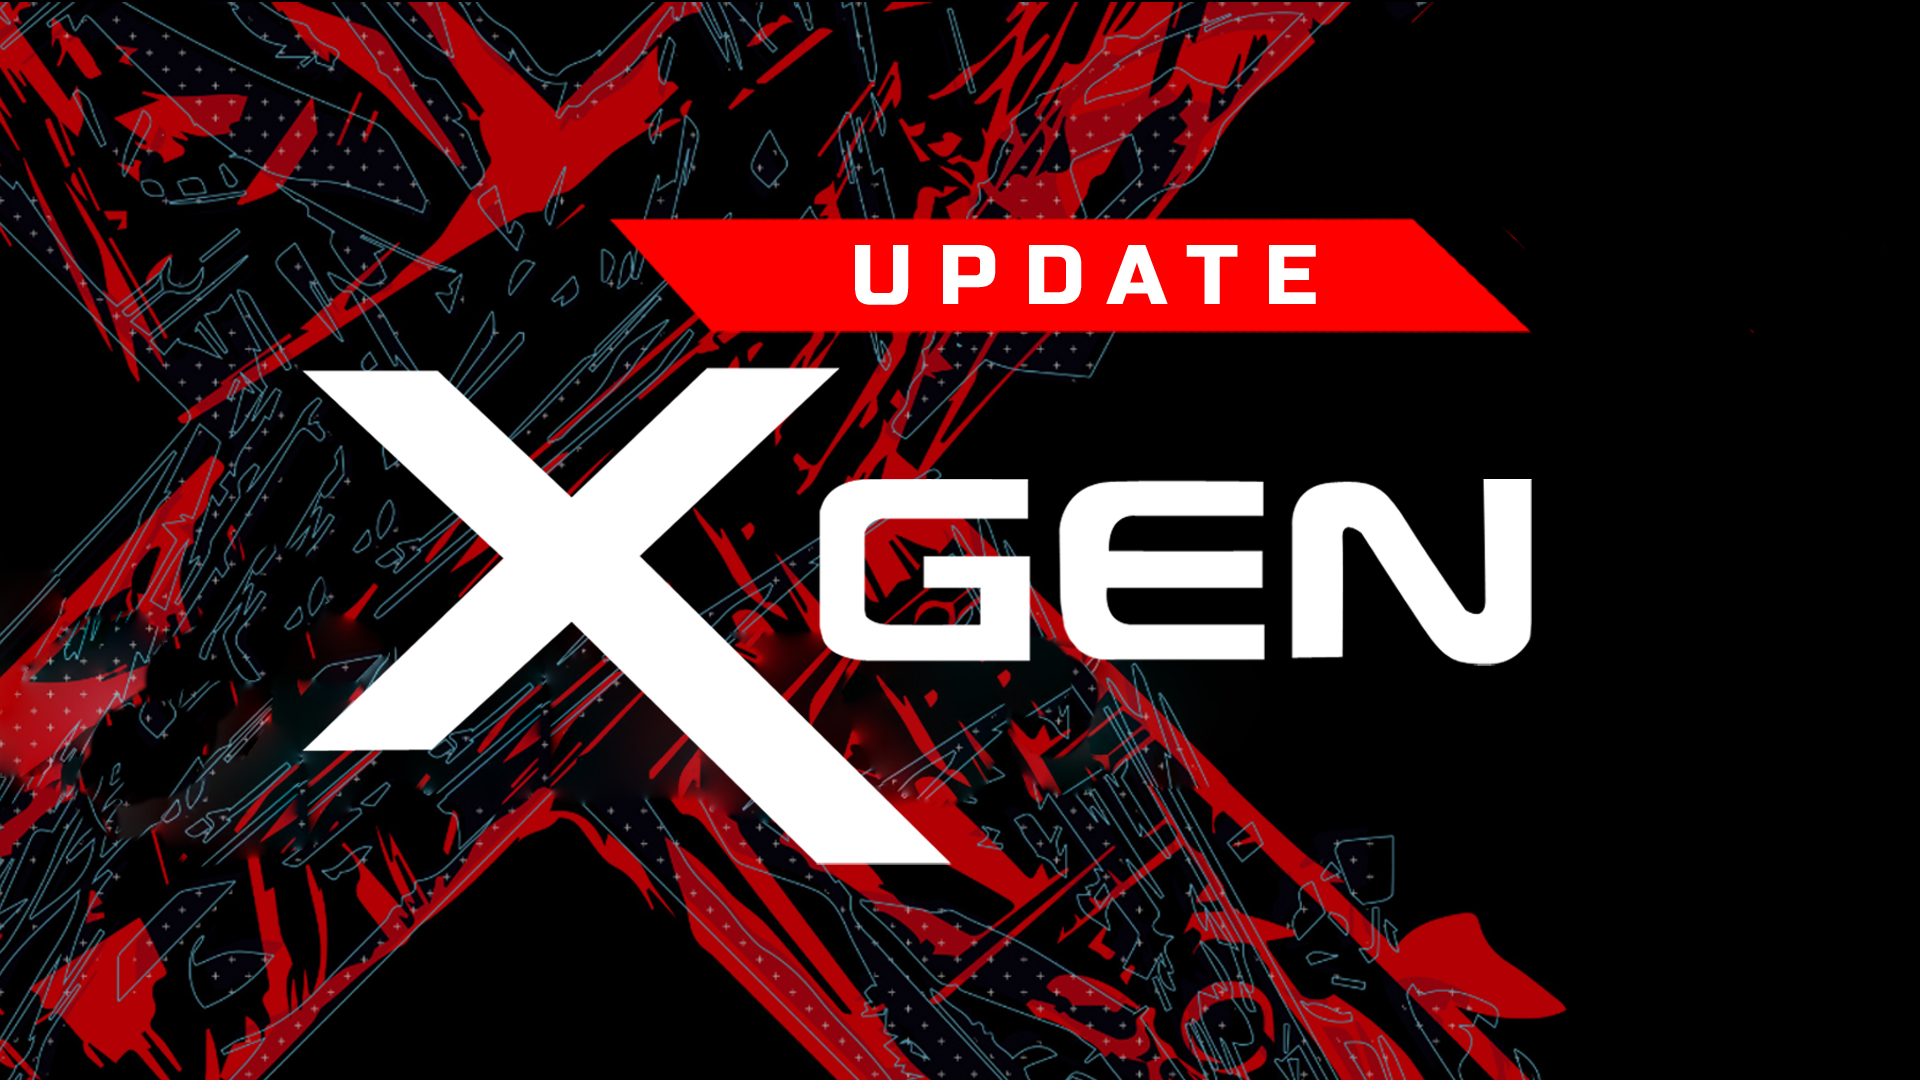 The update of XGEN software with data recovery function